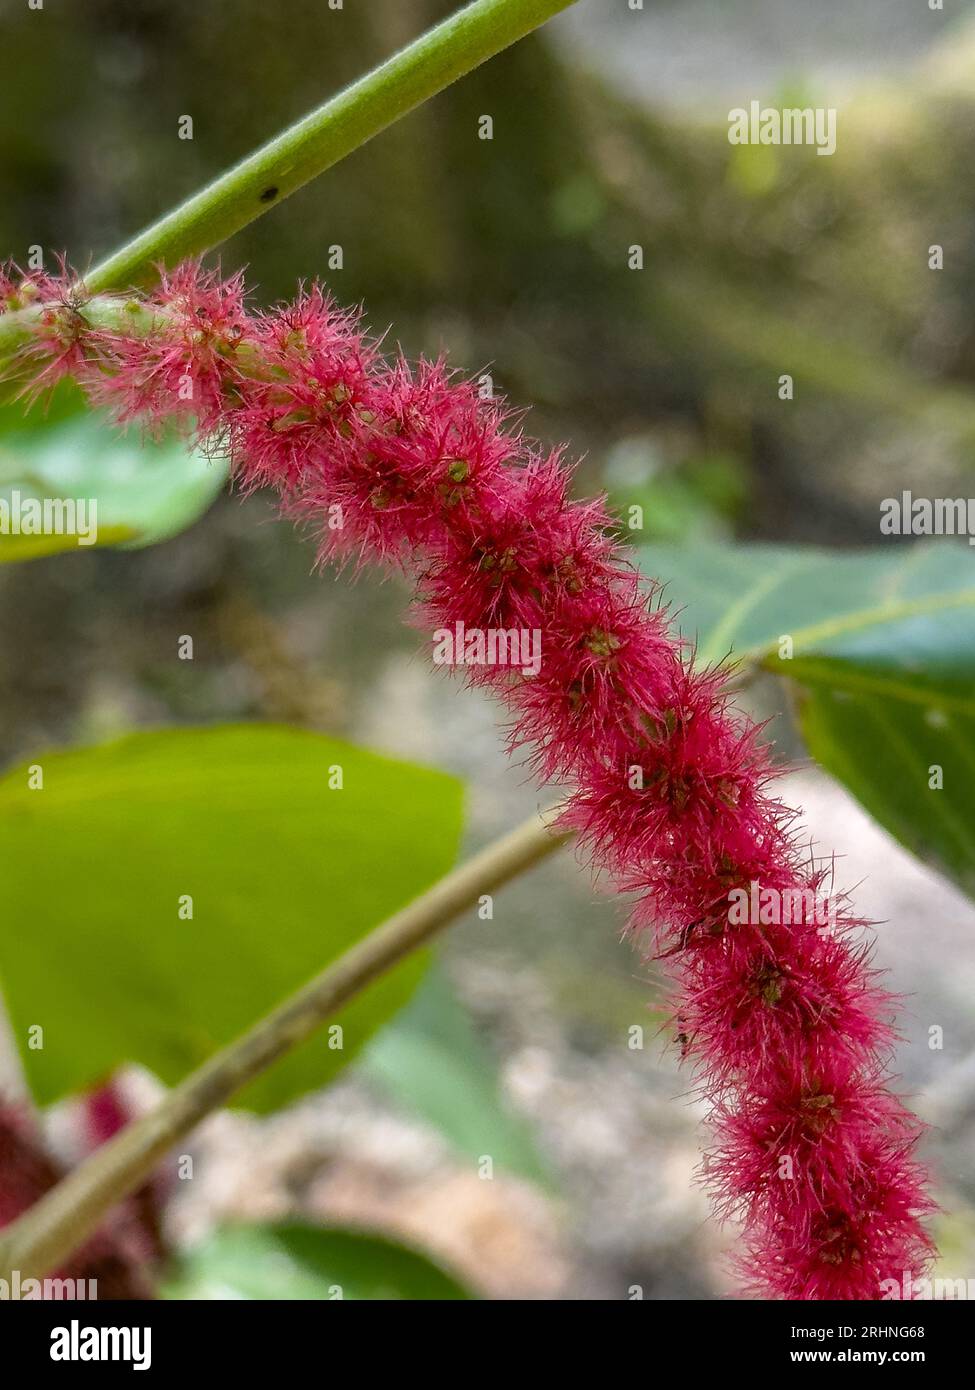 The red inflorescence of a chenille plant, Acalypha hispida, in the Cahal Pech Archeological Reserve in San Ignacio, Belize. Stock Photo